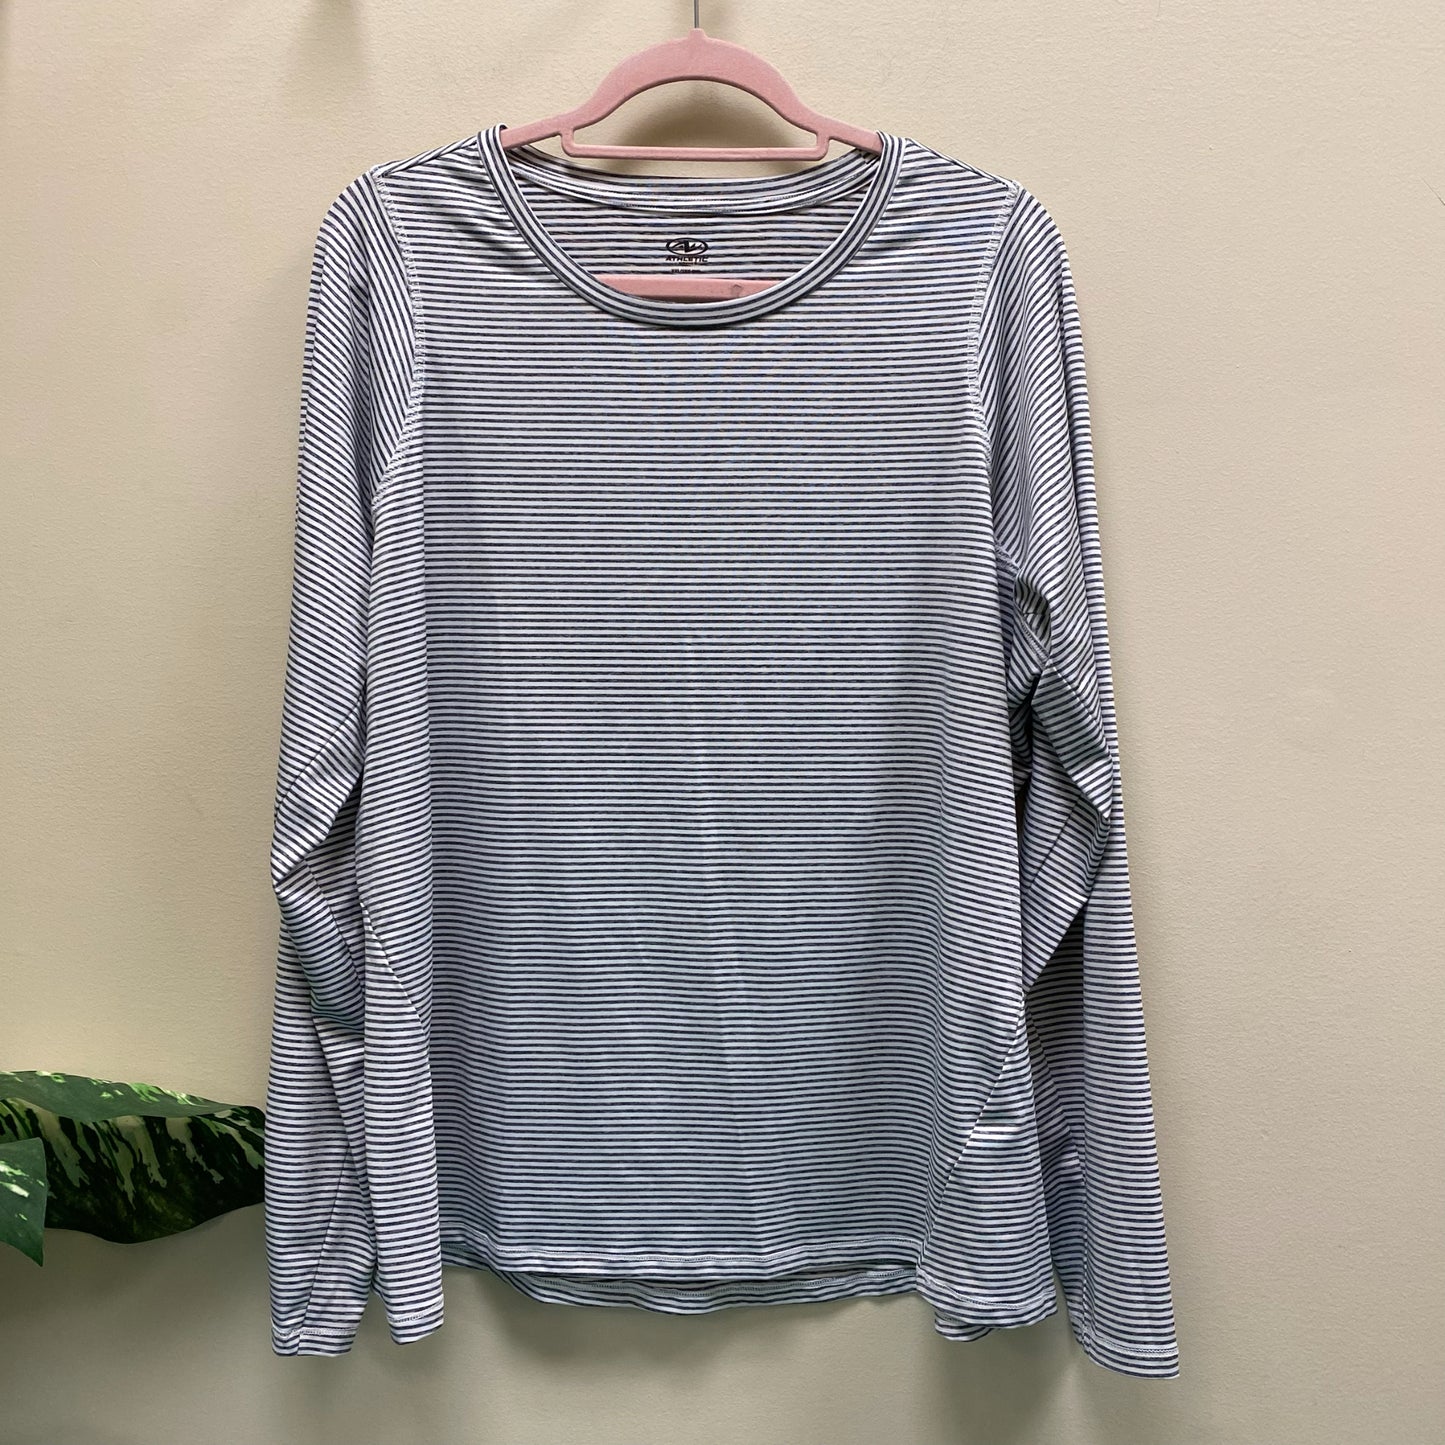 Athletic Works Top - Size XXL